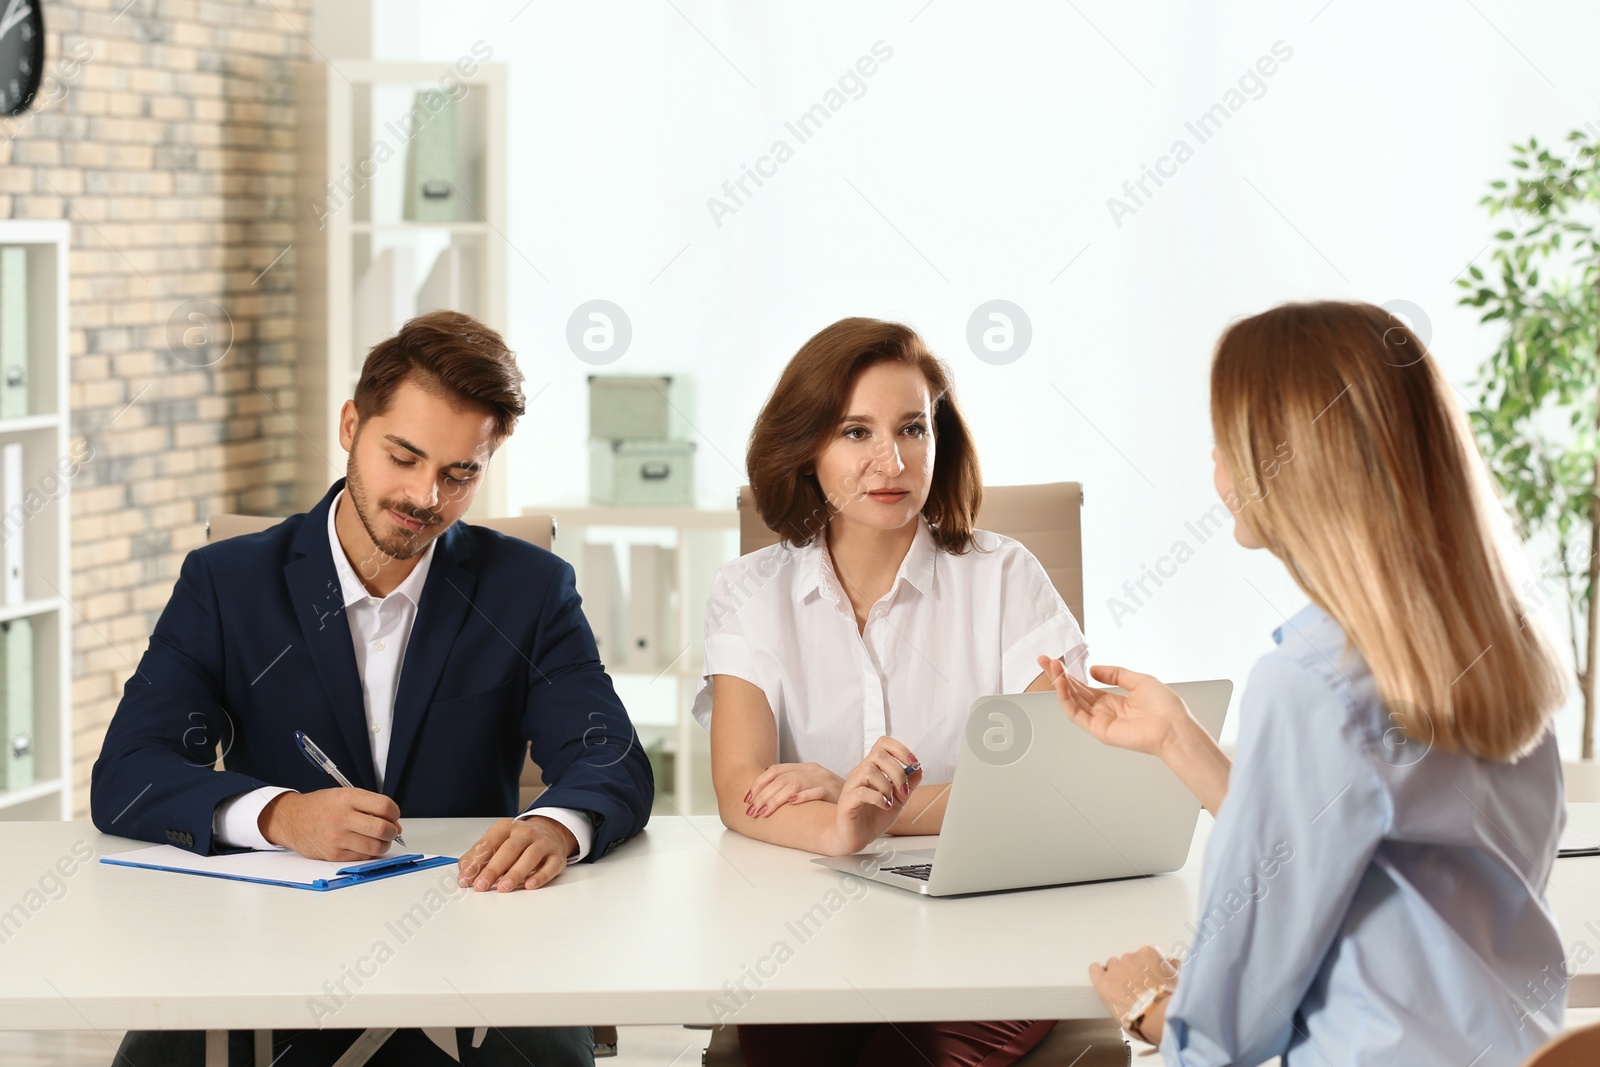 Photo of Human resources commission conducting job interview with applicant in office